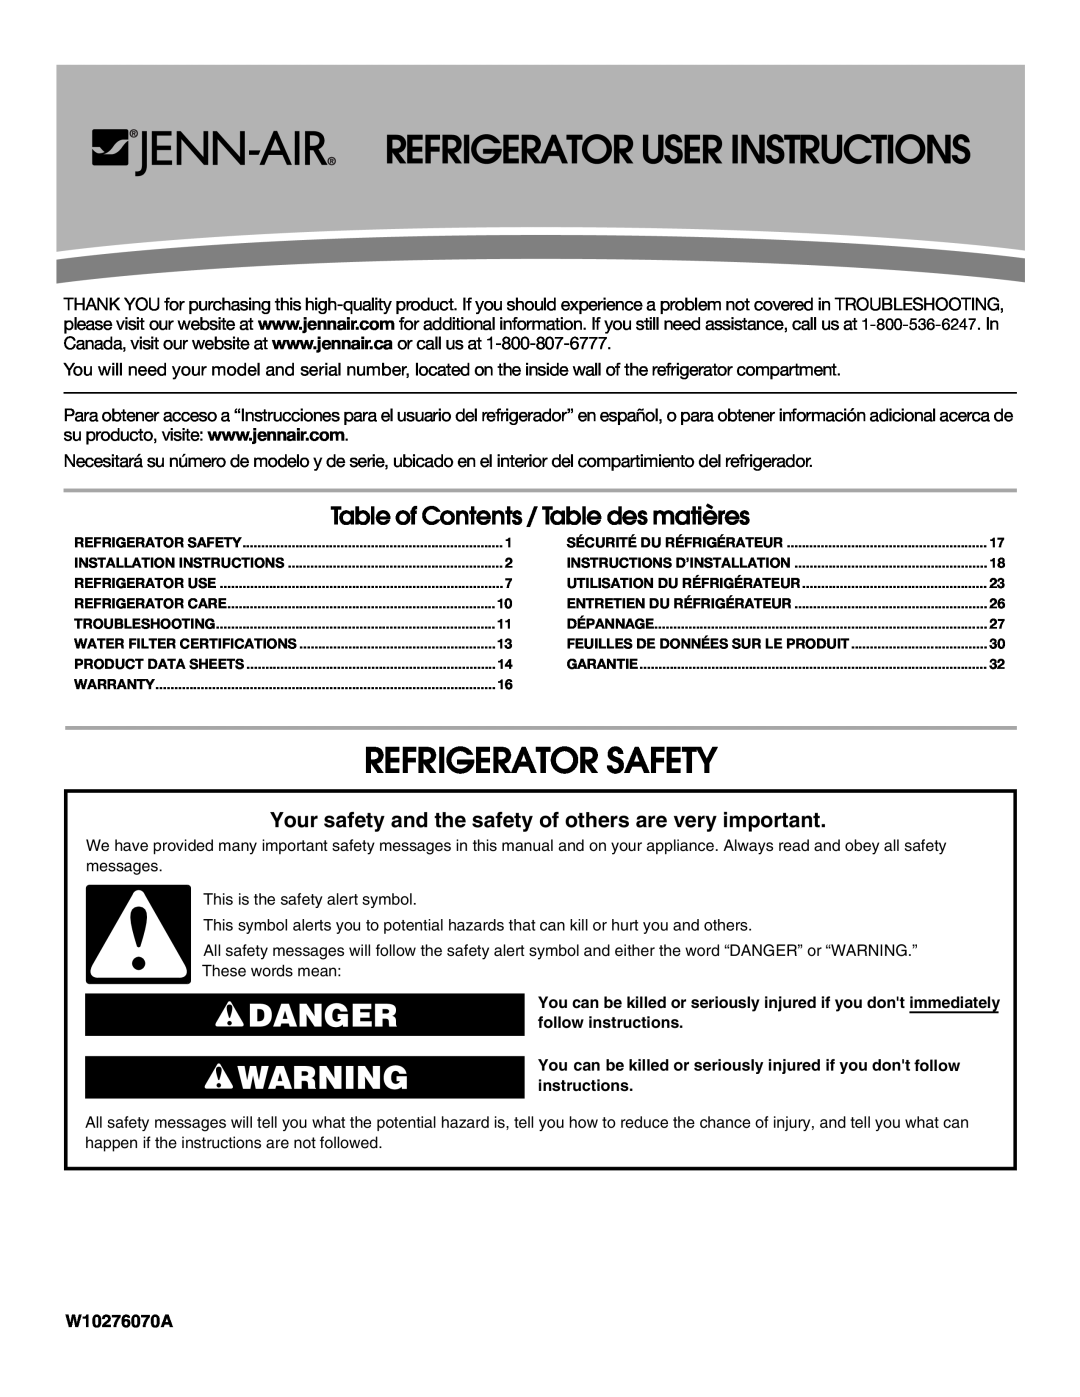 Jenn-Air W10276070A installation instructions Refrigerator Safety, Danger, Table of Contents / Table des matières 